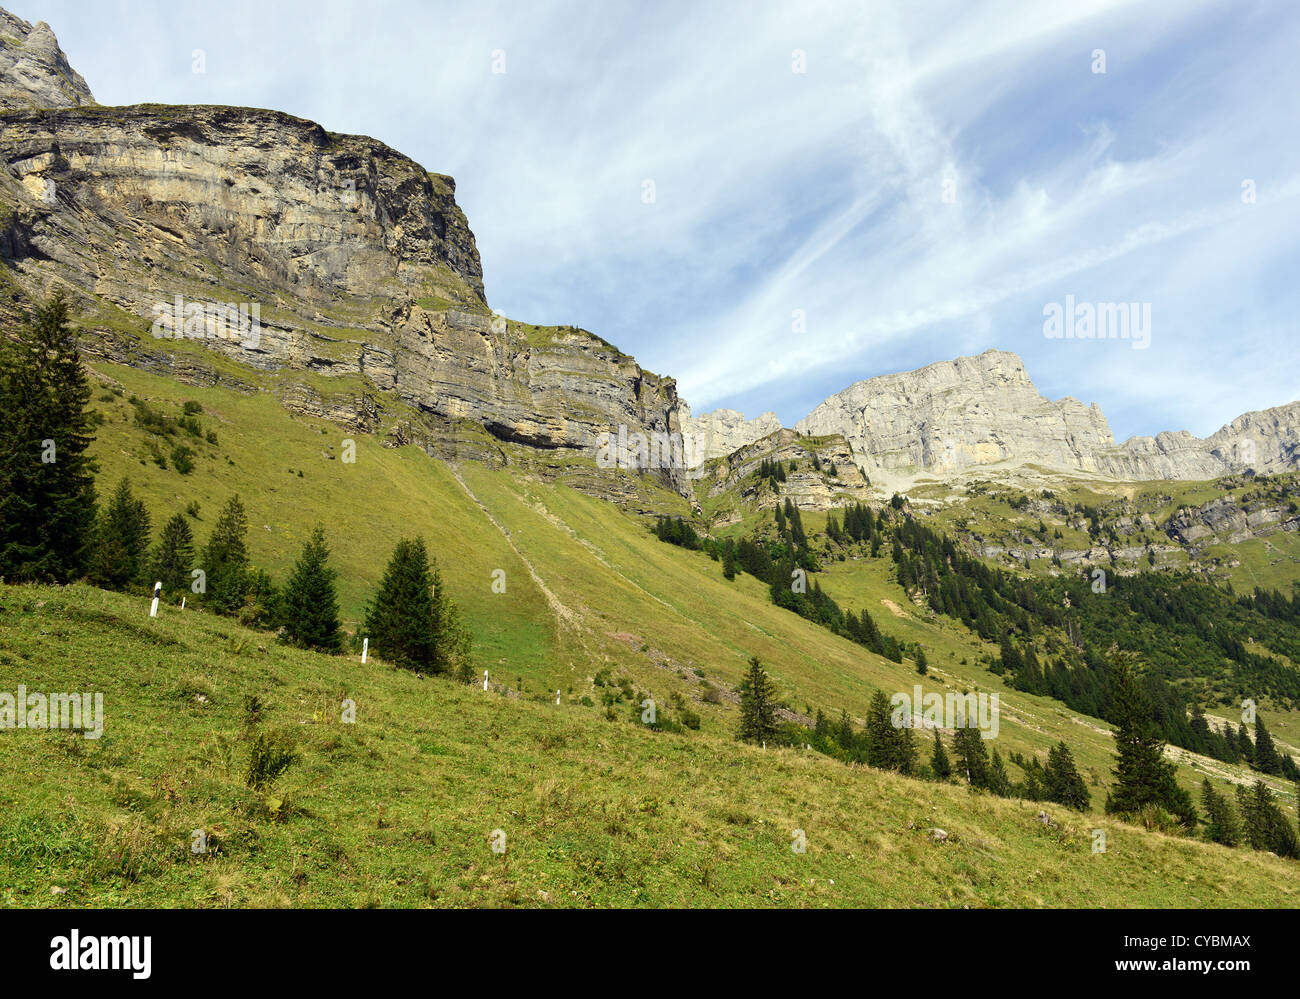 Page 2 - Aussichten High Resolution Stock Photography and Images - Alamy